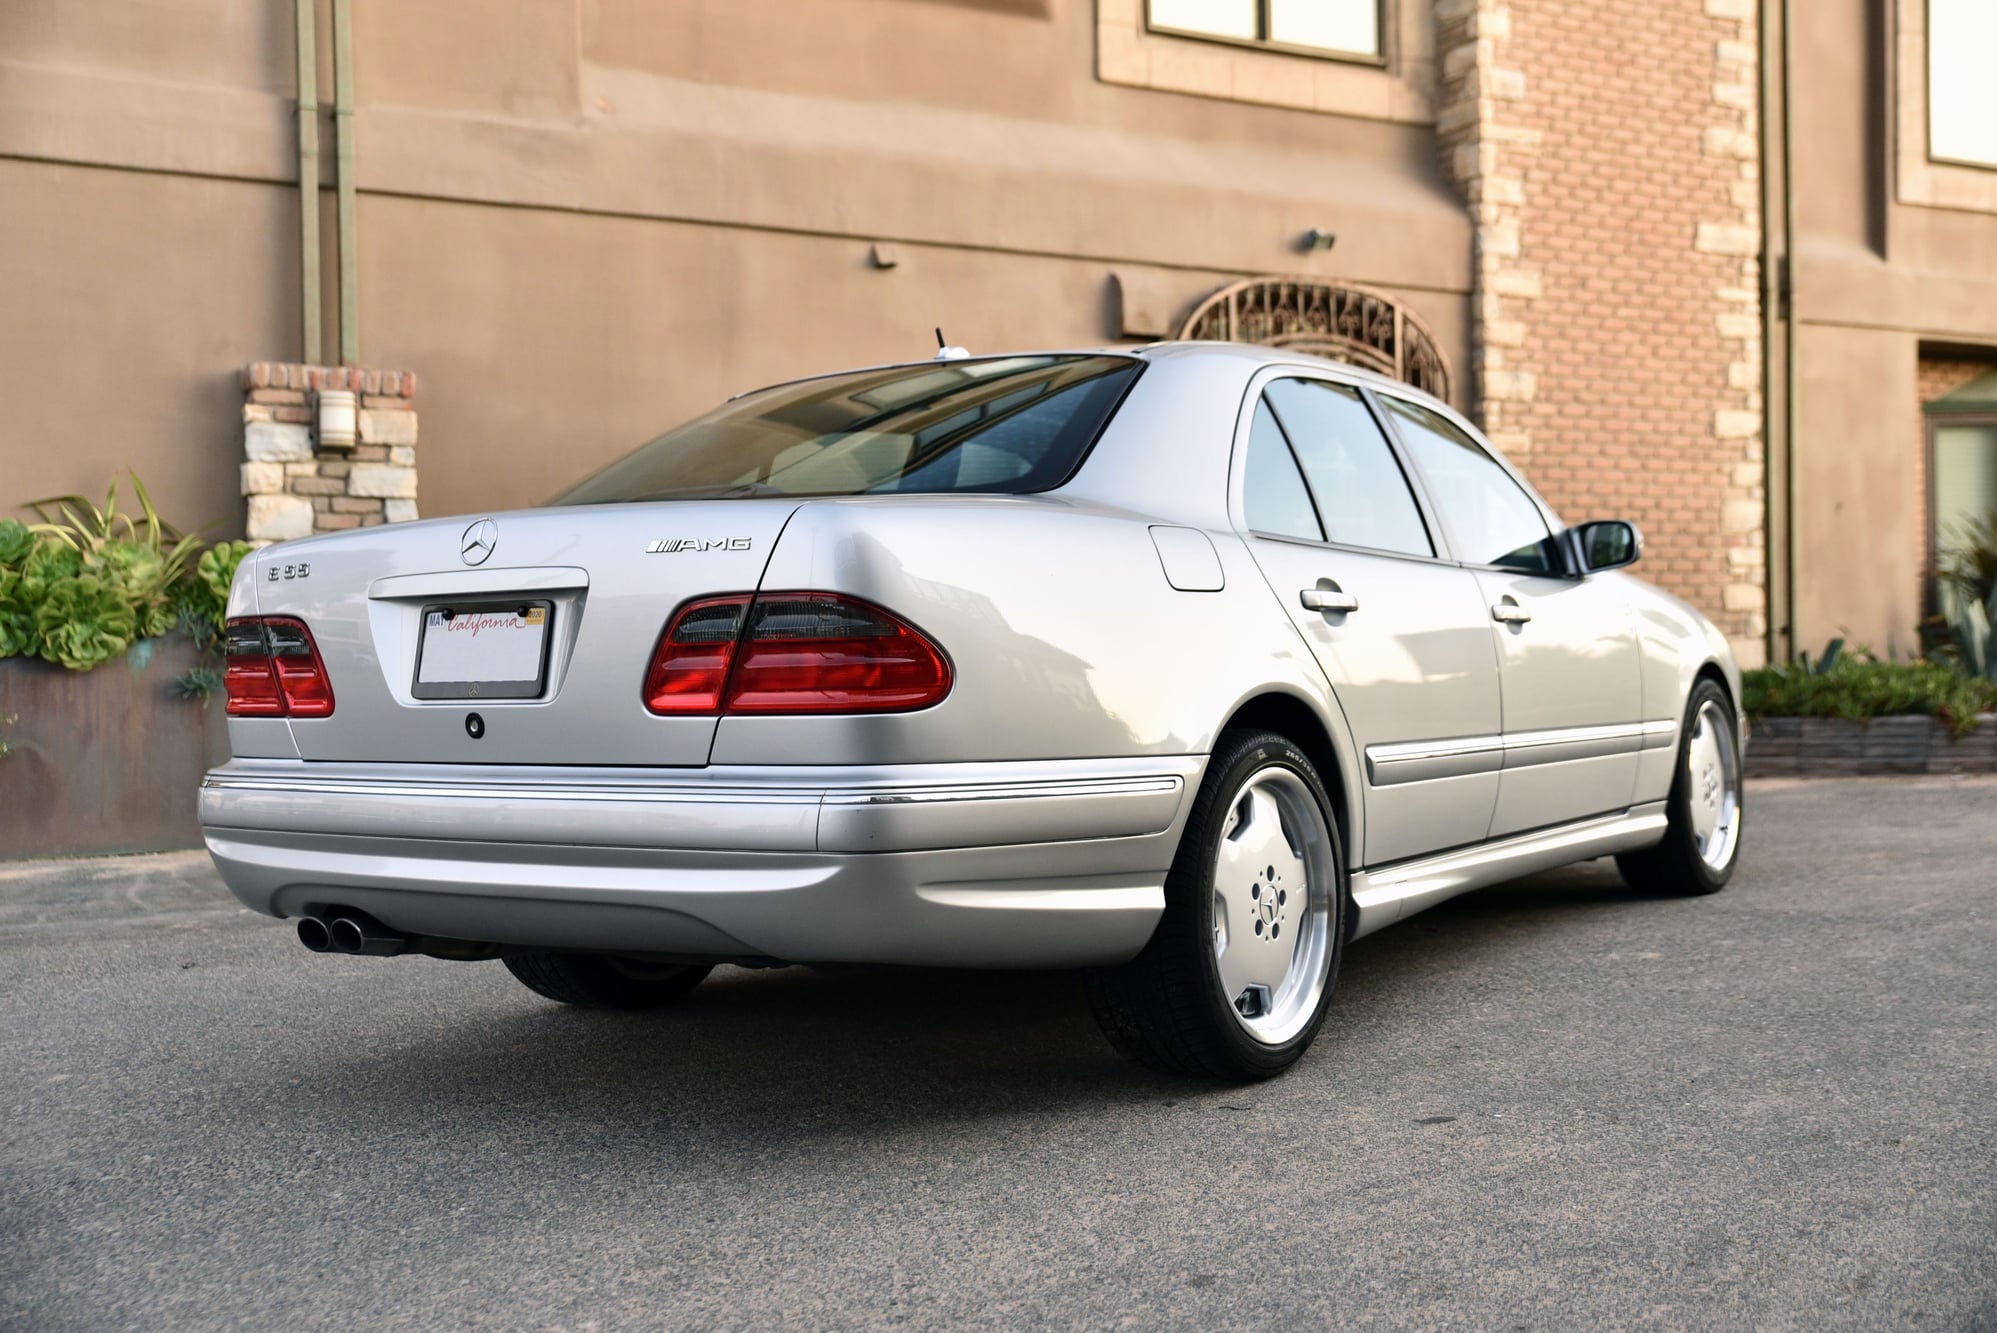 2002 Mercedes-Benz E55 AMG - 2002 Mercedes-Benz E55 AMG | 2nd Owner | Excellent Condition | Los Angeles/San Diego - Used - VIN WDBJF74J42B456894 - 58,100 Miles - 8 cyl - 2WD - Automatic - Sedan - Silver - Los Angeles, CA 90638, United States